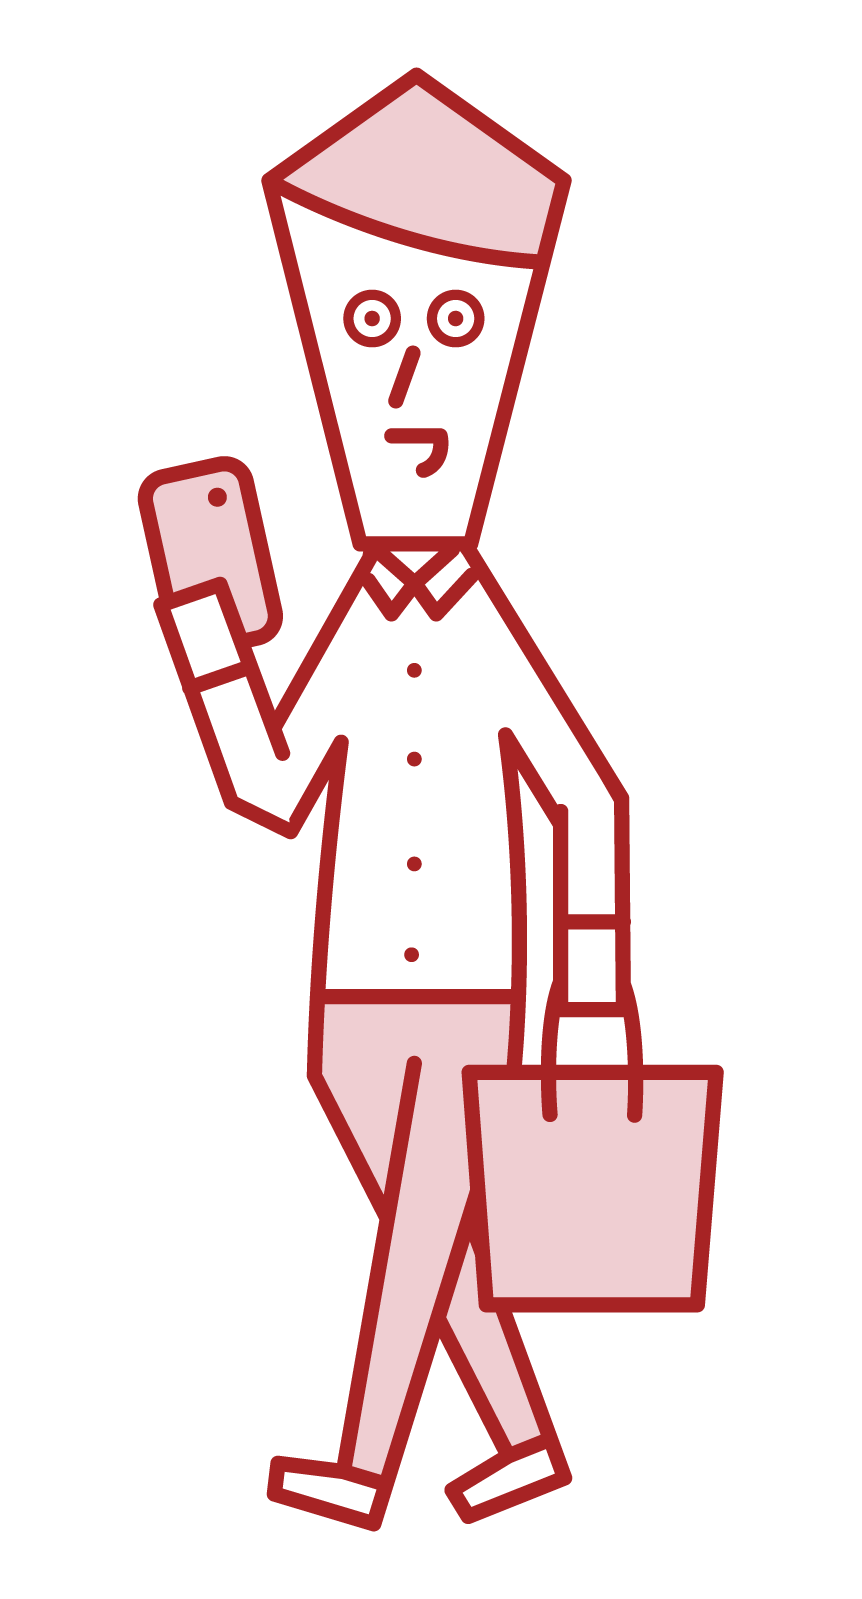 Illustration of a man using a smartphone while walking